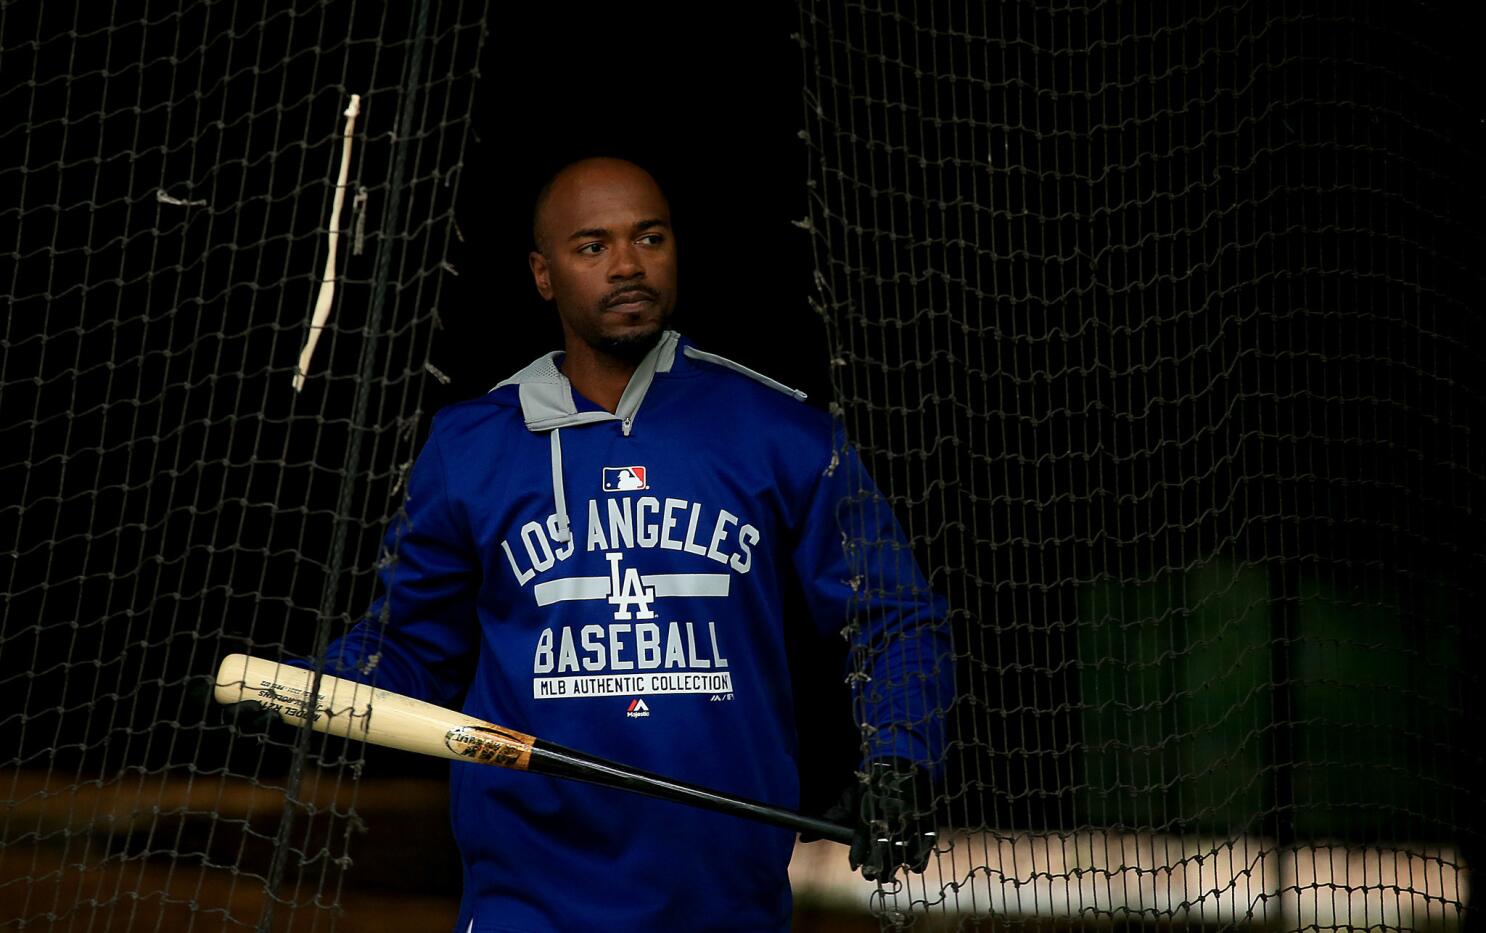 Jimmy Rollins on time with White Sox: A lot of the guys that were